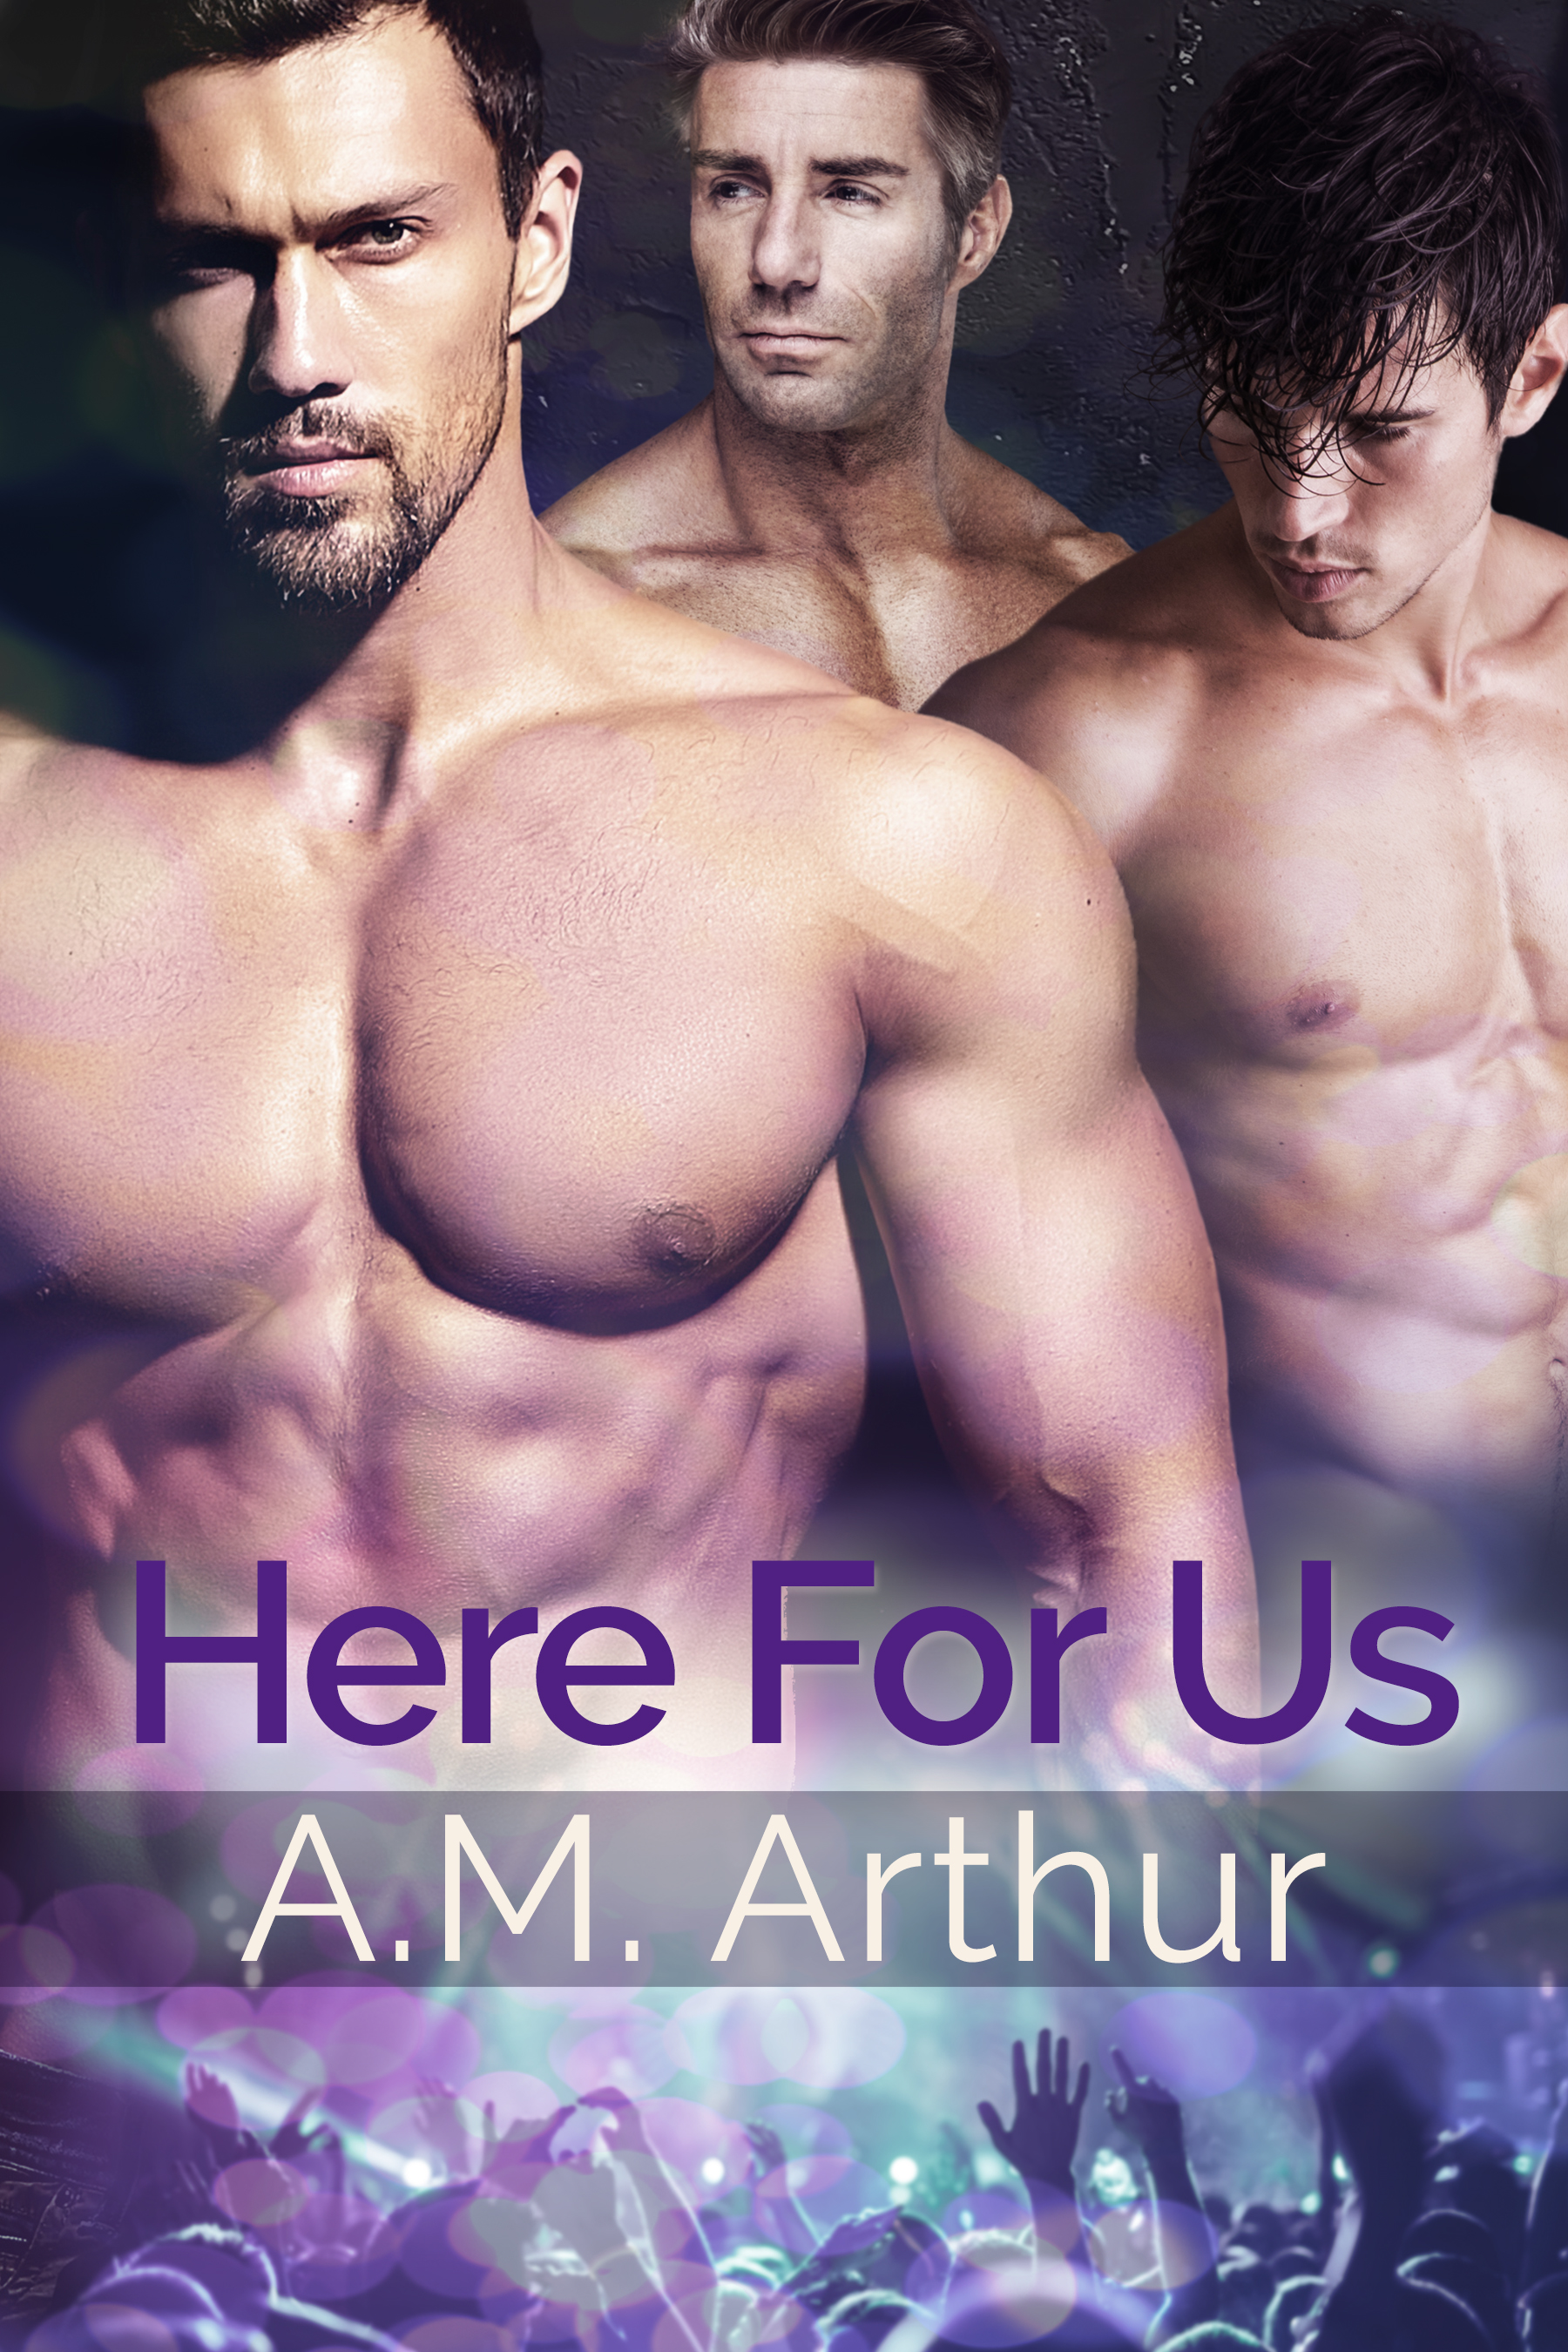 Book Blitz Here For Us by pic